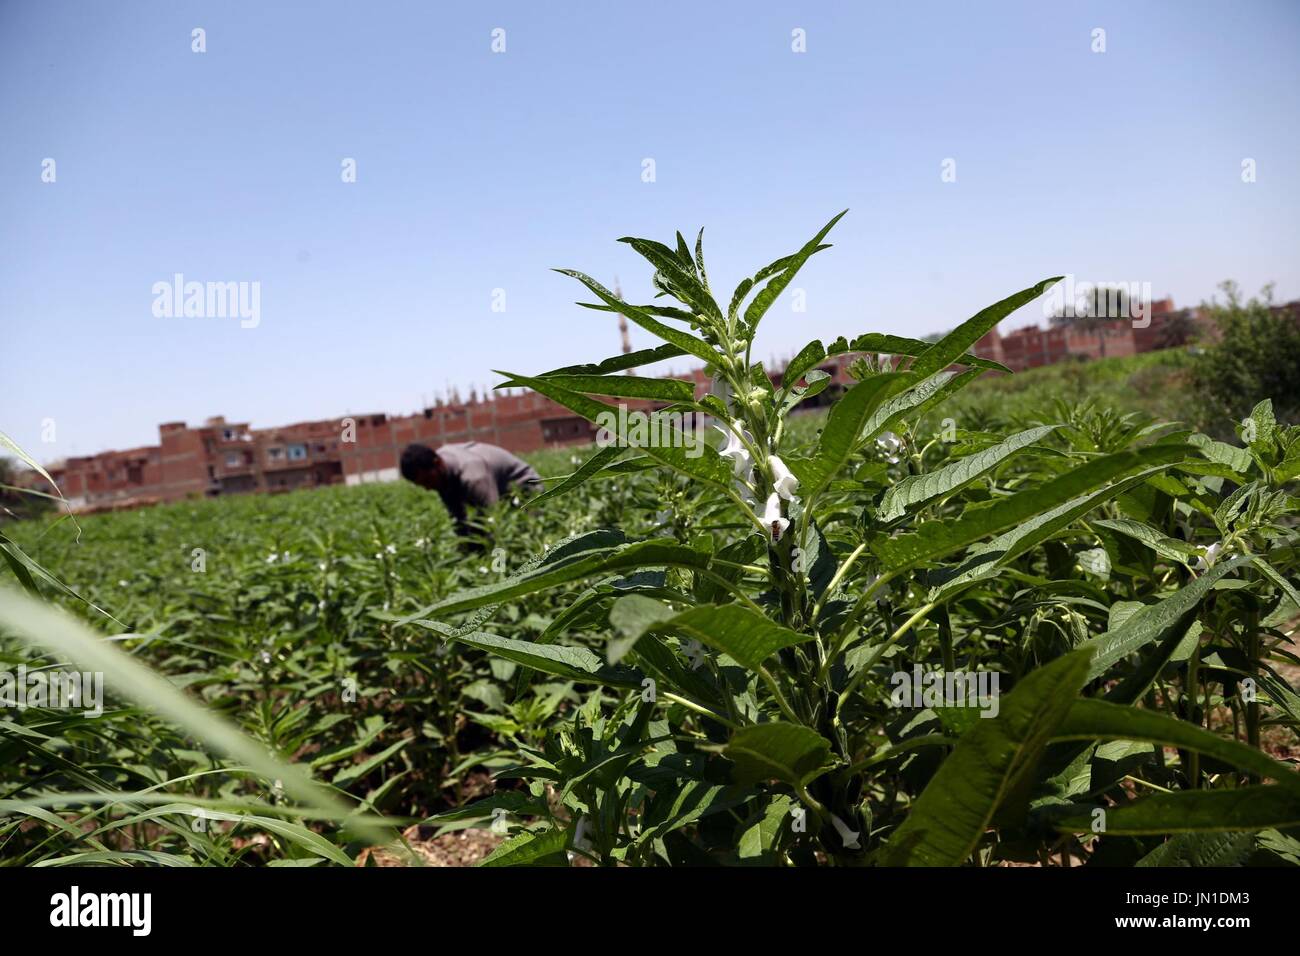 Fayoum. 25th July, 2017. A worker harvests medicinal herbs in Fayoum, Egypt on July 25, 2017. Egypt has been home to a variety of herbs for thousands of years as ancient Egyptian relics, temples and tombs contained hundreds of medical prescriptions with medicinal herbs. So far, Egypt still produces the finest herbs, with Fayoum as the only producer of organic Medicinal and Aromatic Plants (MAPs). These crops are mainly grown in Upper Egypt's provinces of Minya, Beni Suef, Assiut and Fayoum. Credit: Ahmed Gomaa/Xinhua/Alamy Live News Stock Photo